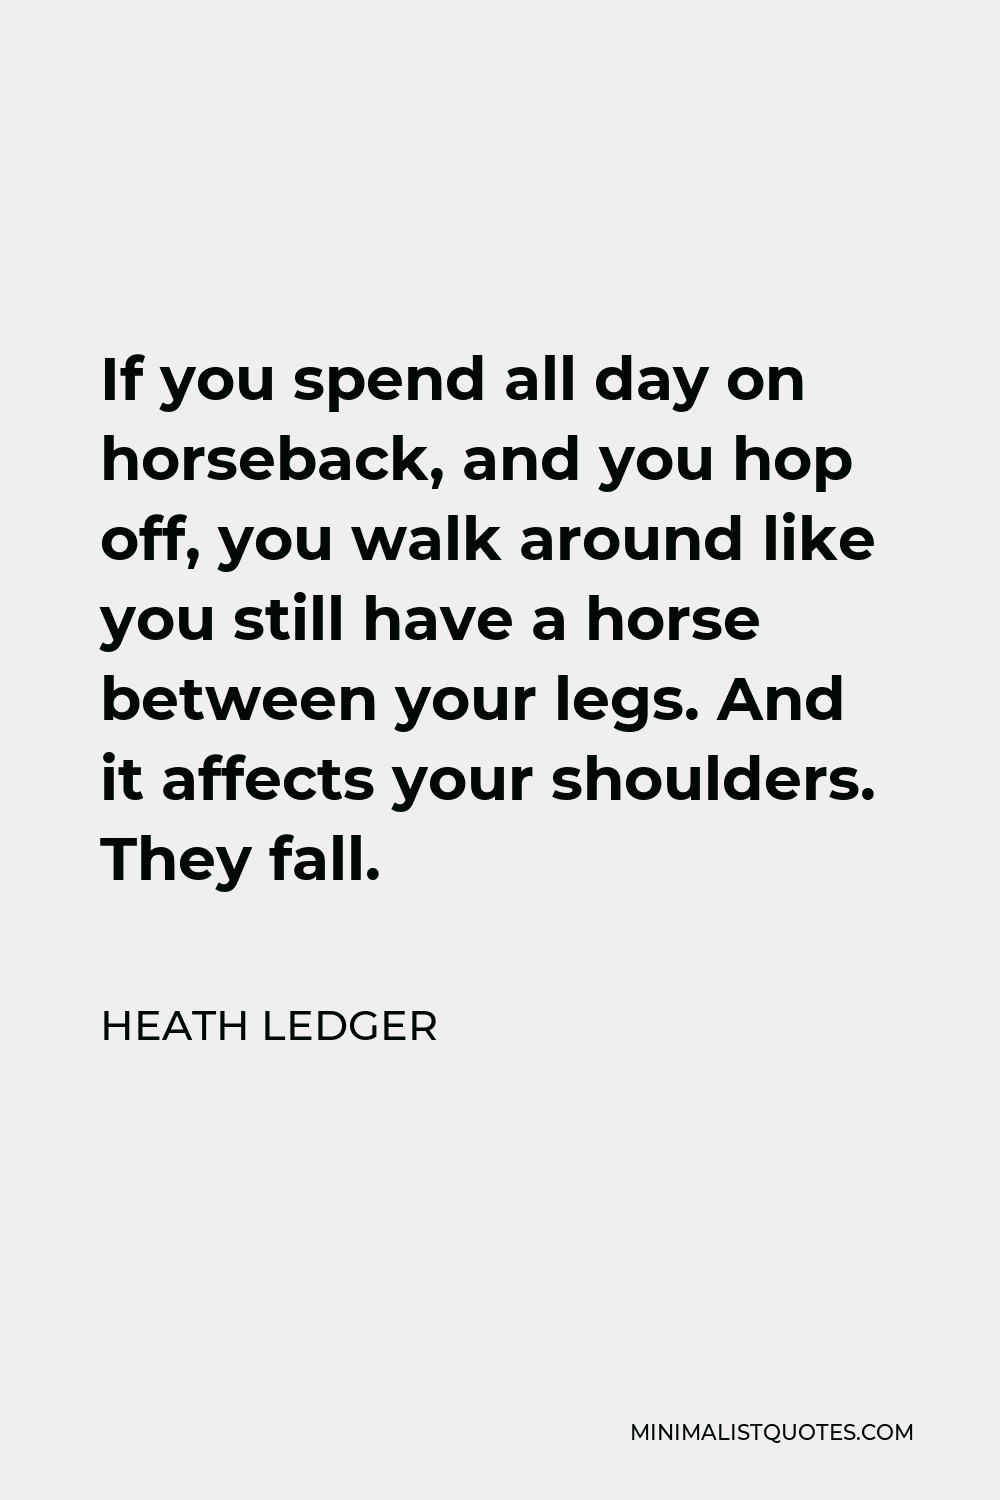 Heath Ledger Quote - If you spend all day on horseback, and you hop off, you walk around like you still have a horse between your legs. And it affects your shoulders. They fall.